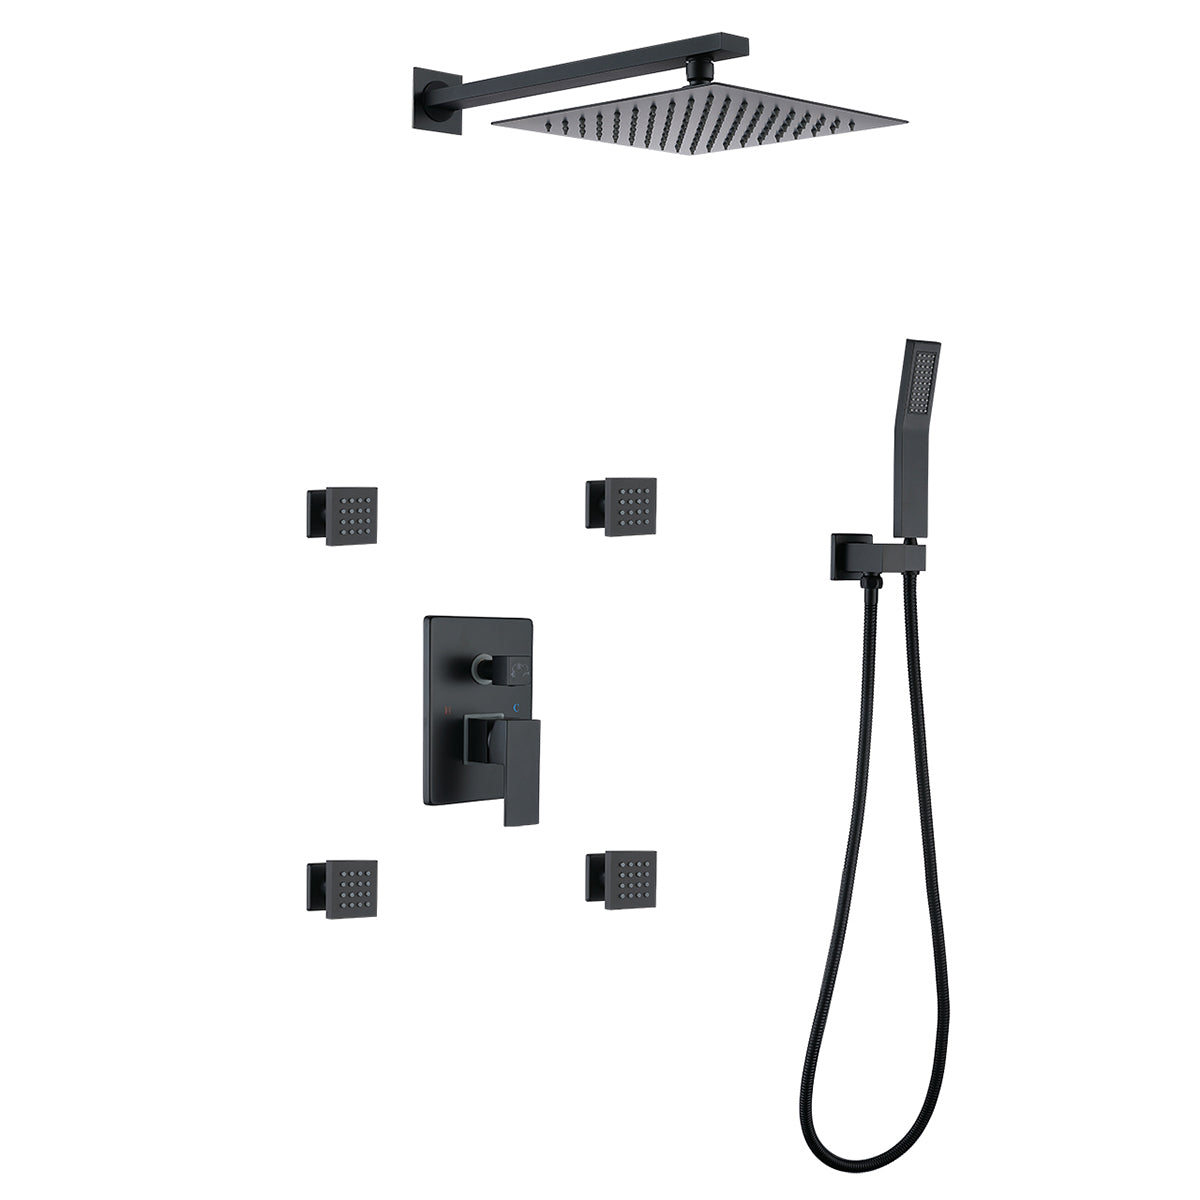 Clihome® | Waterfall Top Spray Wall-Mounted Bathroom Shower System with 4 Side Spray